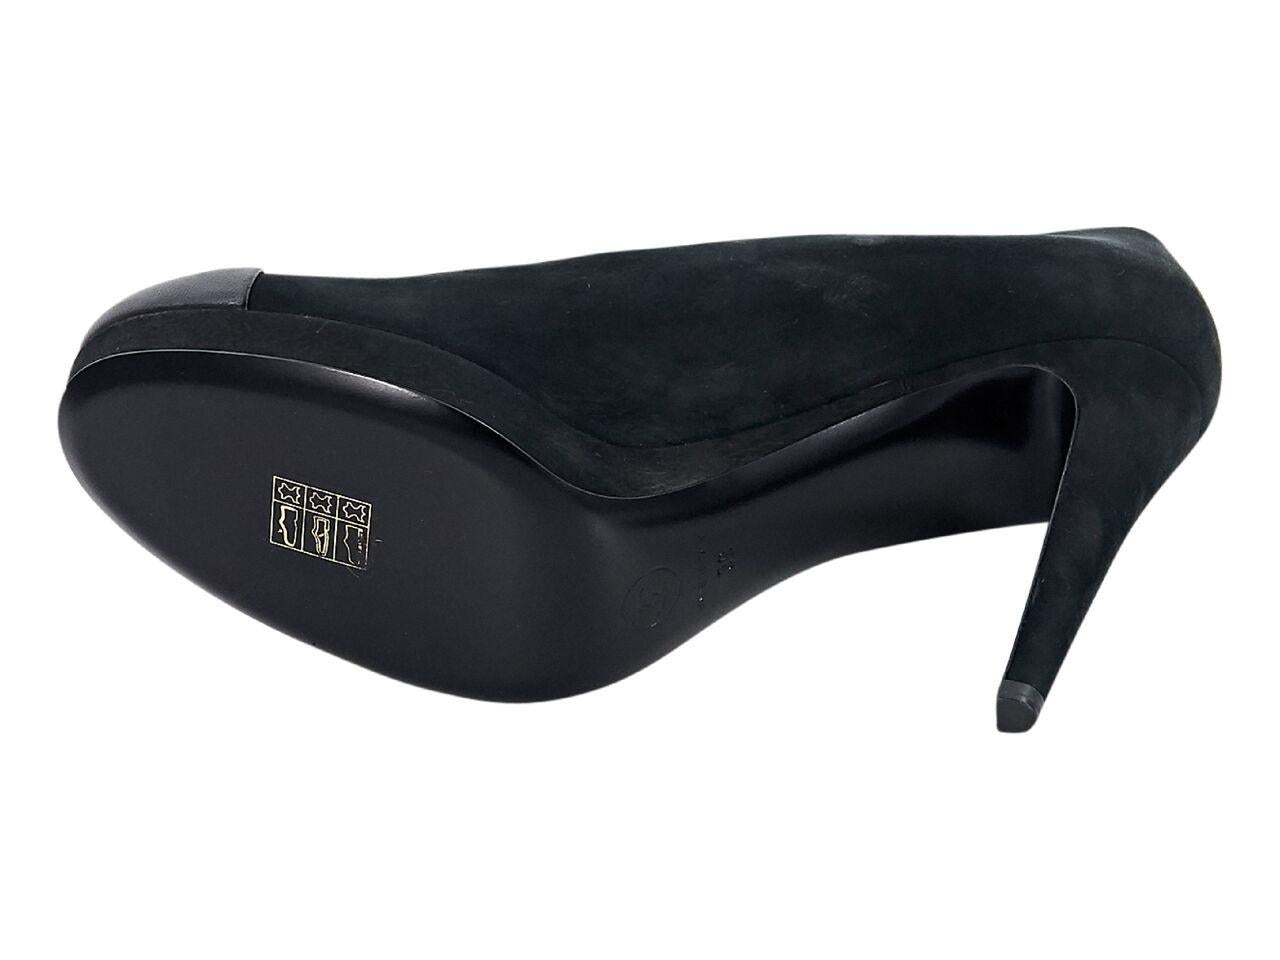 Product details:  Black suede platform pumps by Chanel.  Round leather cap toe.  Slip-on style.  4